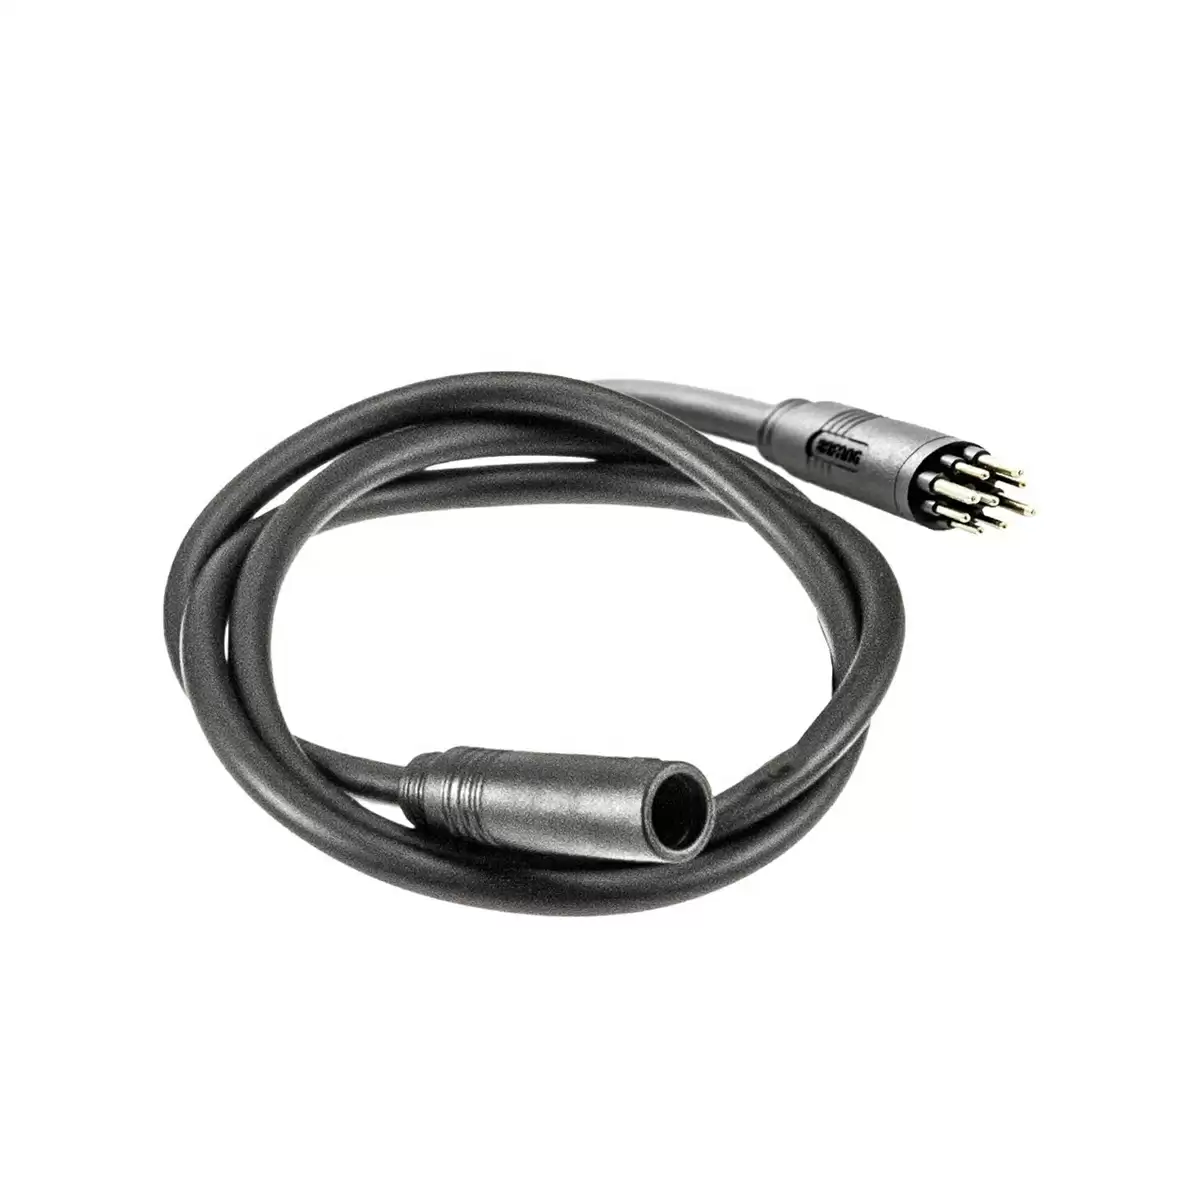 Motor extension Cable 50cm - image